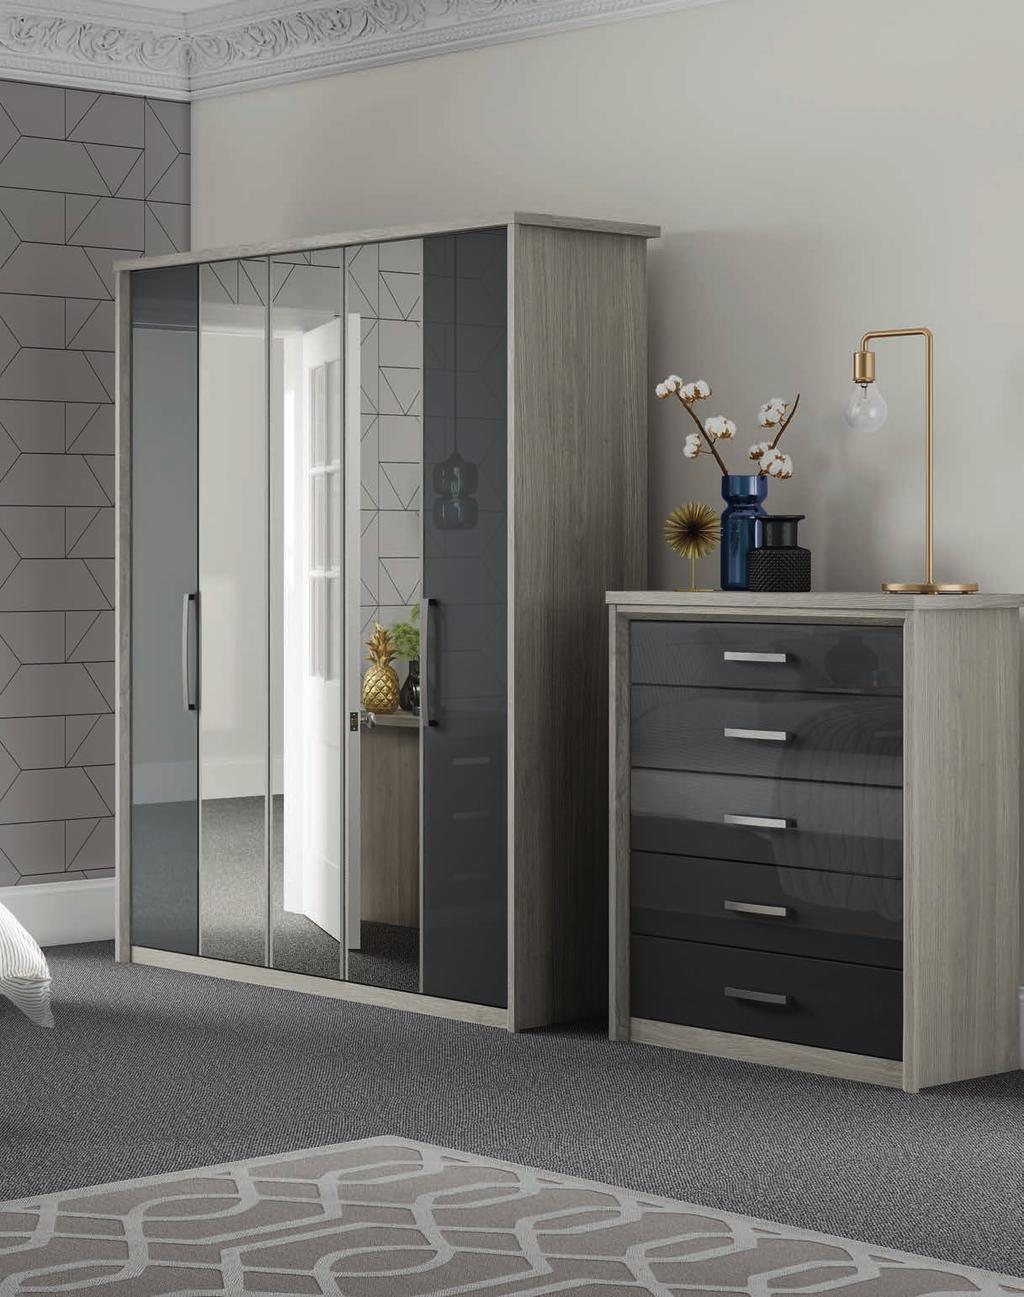 COSMOS KINGSTOWN 7 COSMOS On trend modern collection. Cosmos provides an ultra high gloss finish. This contemporary looking bedroom furniture comes with soft close drawers and doors as standard.